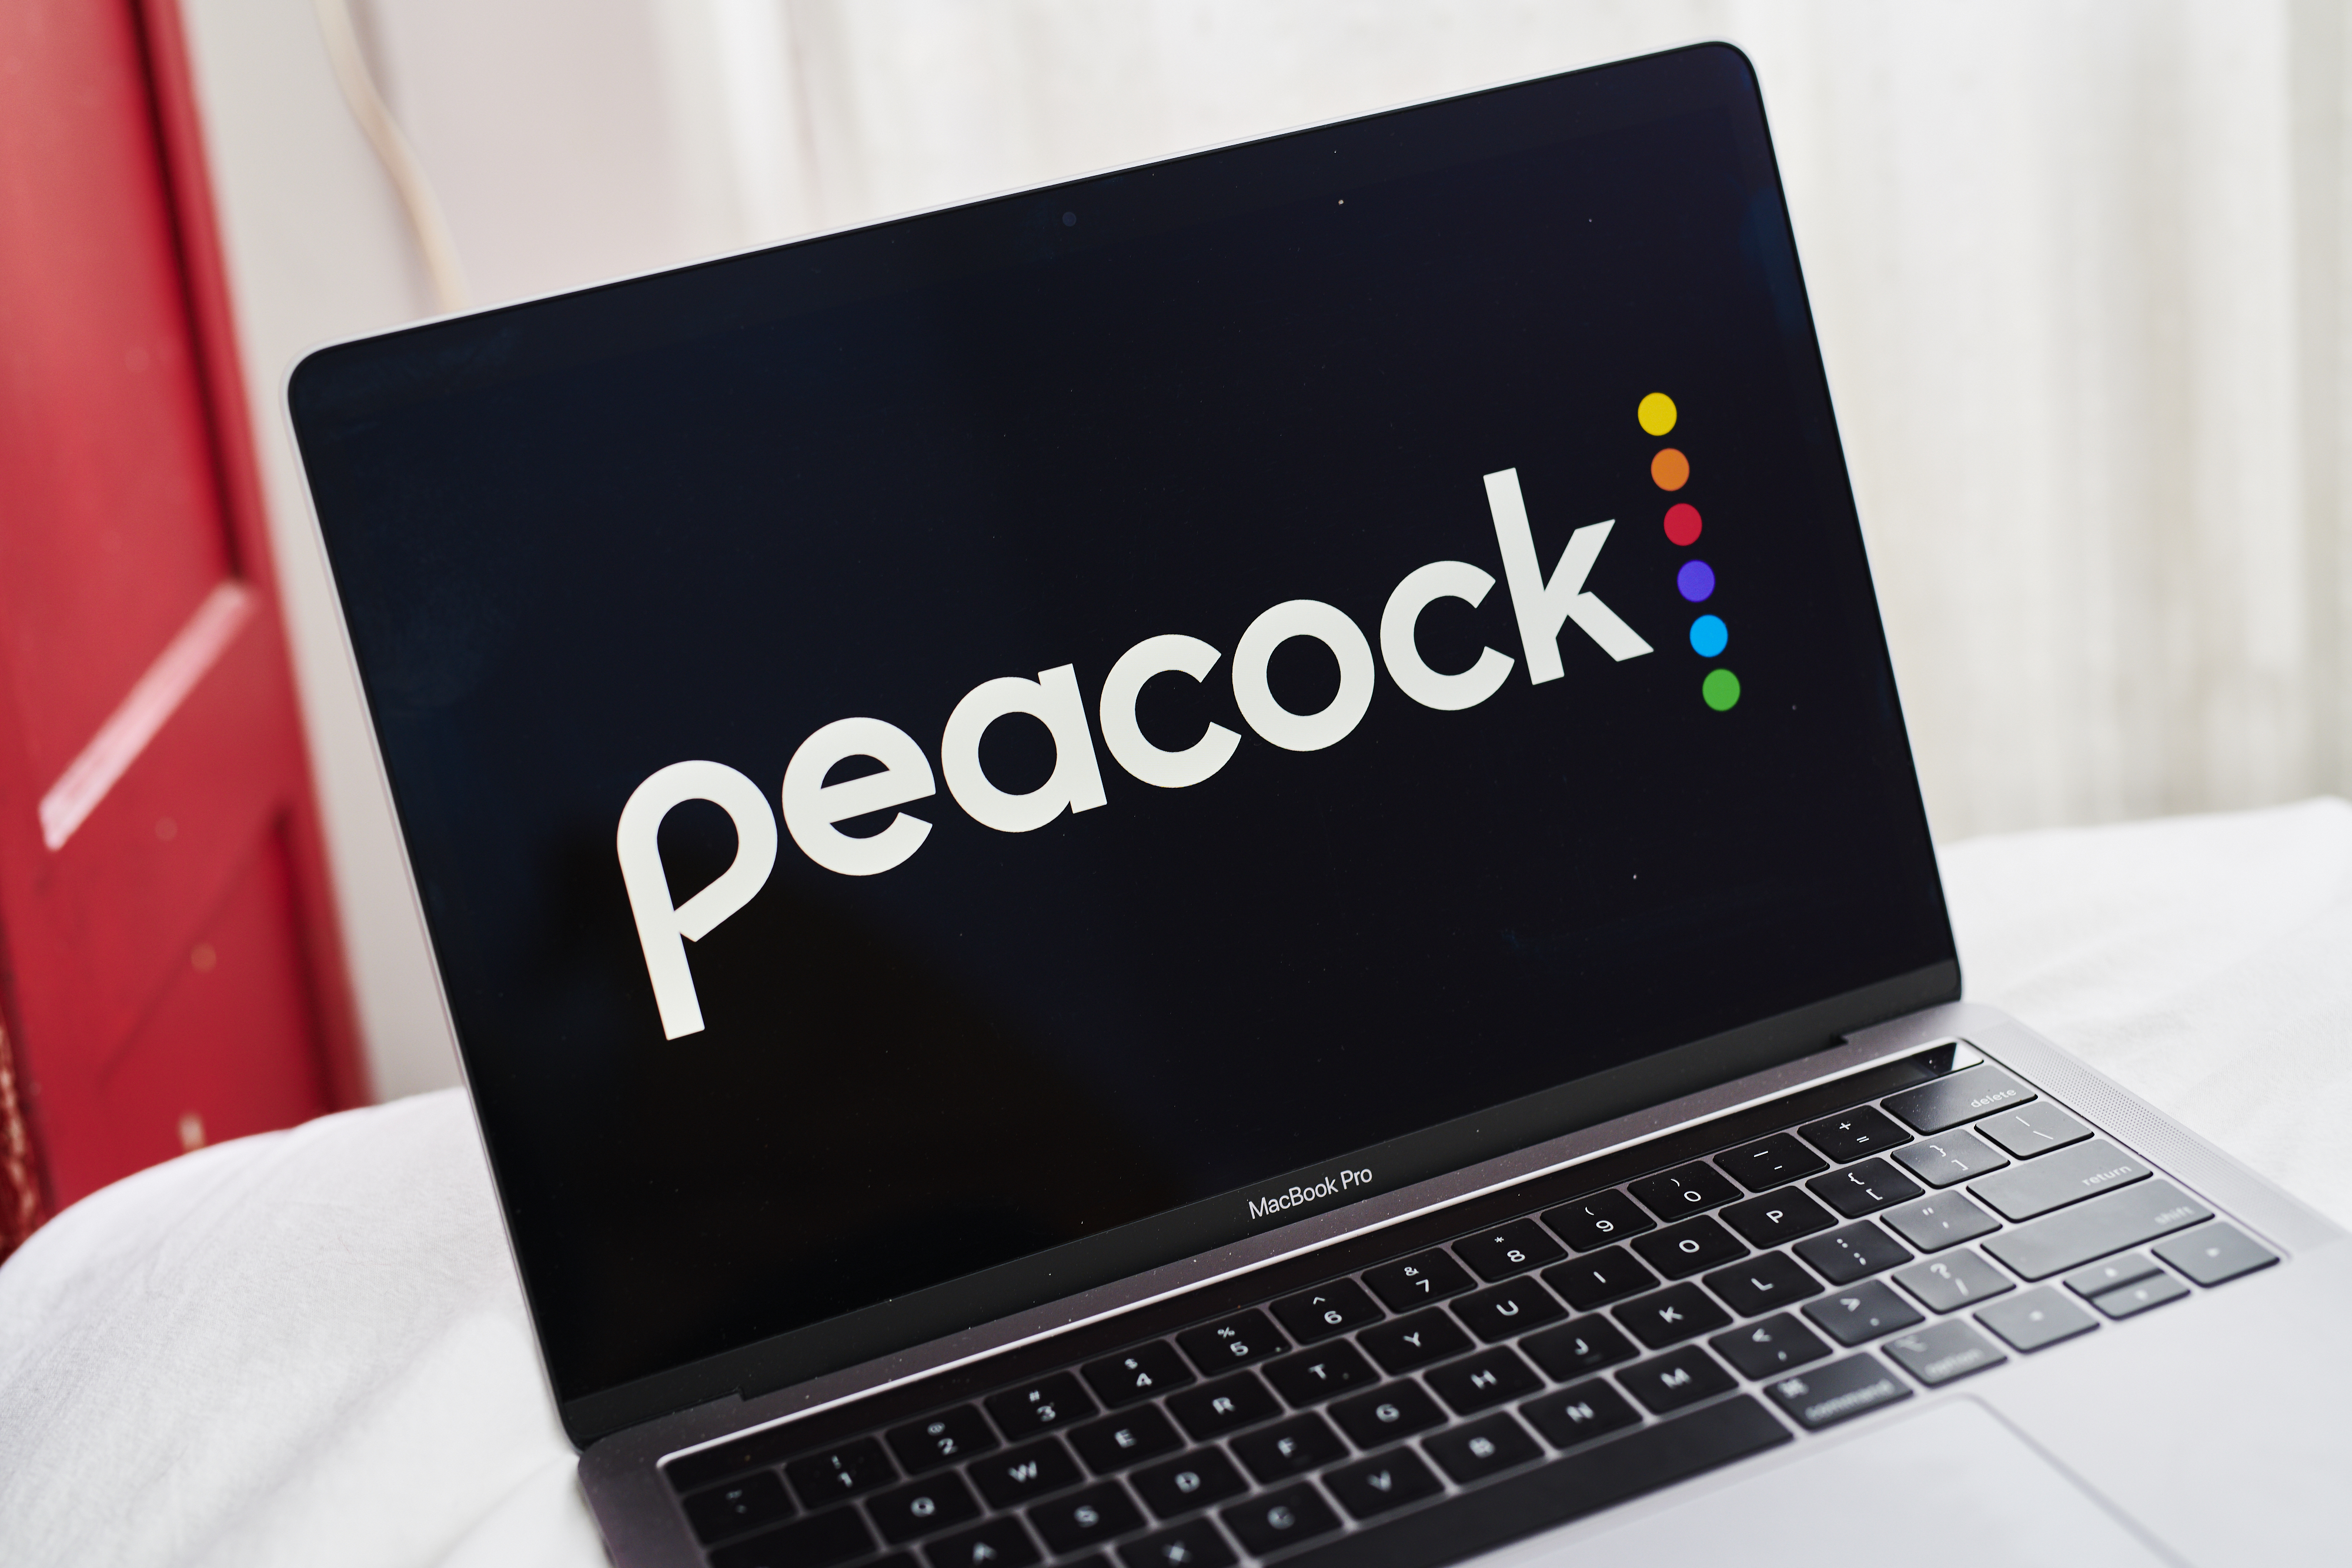 Peacock paid subscriptions grow 40% in Q1 2022 to hit 13m - SportsPro